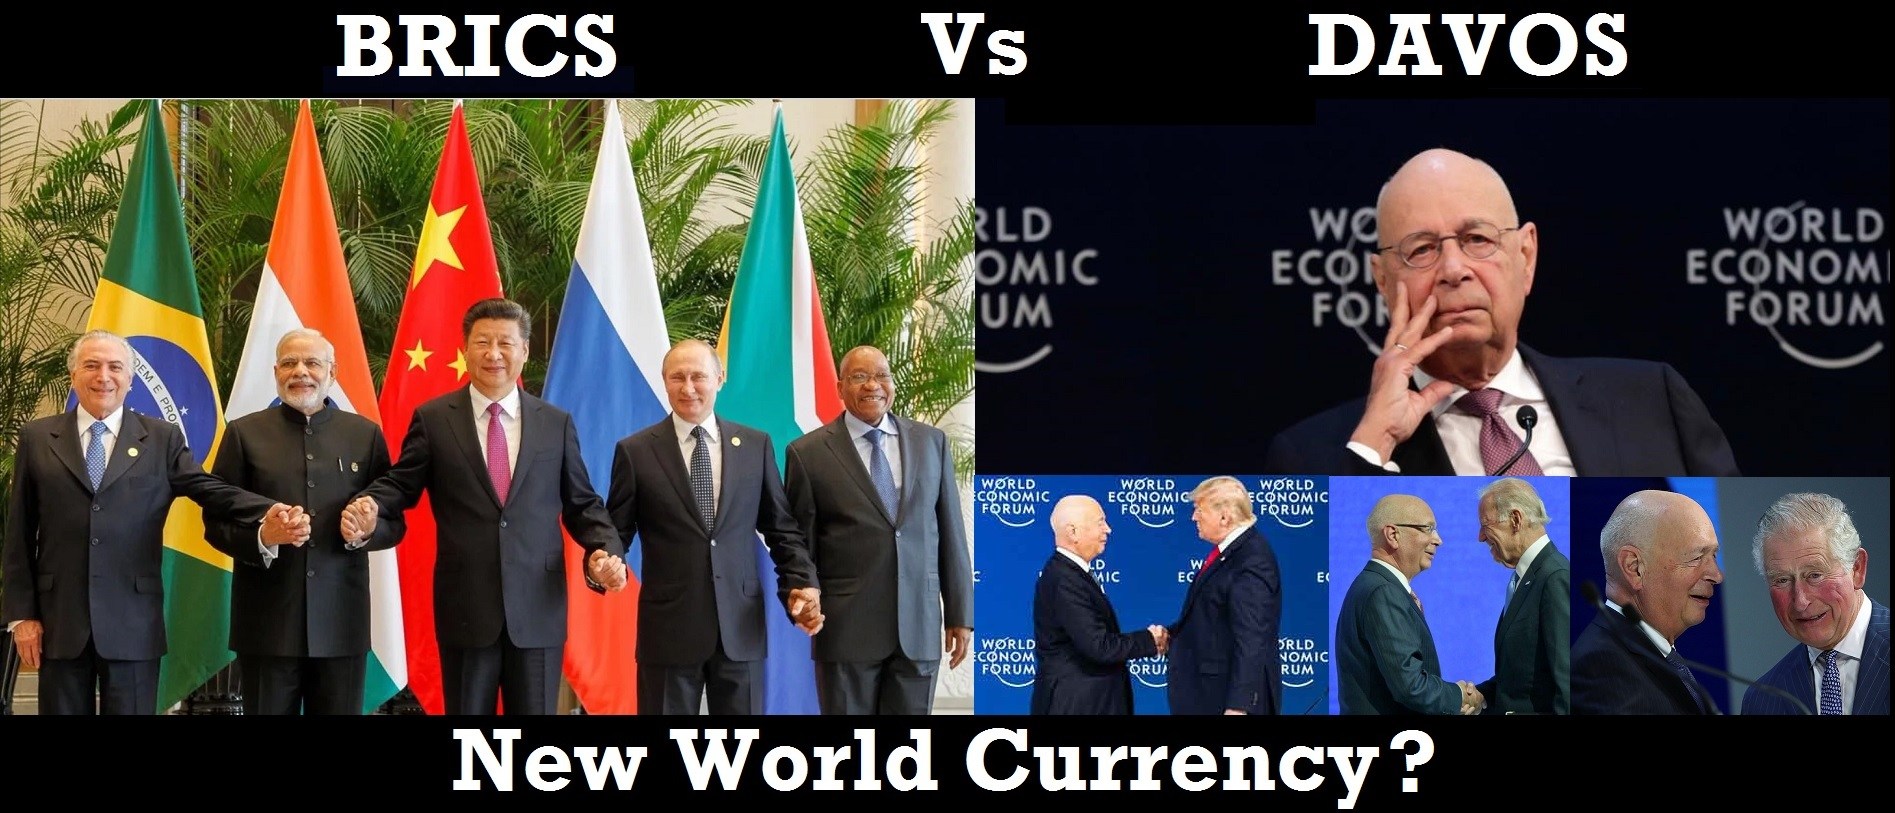 BRICS vs. Davos: The Race to a New World Currency Brics-vs-davos-new-world-currency-2